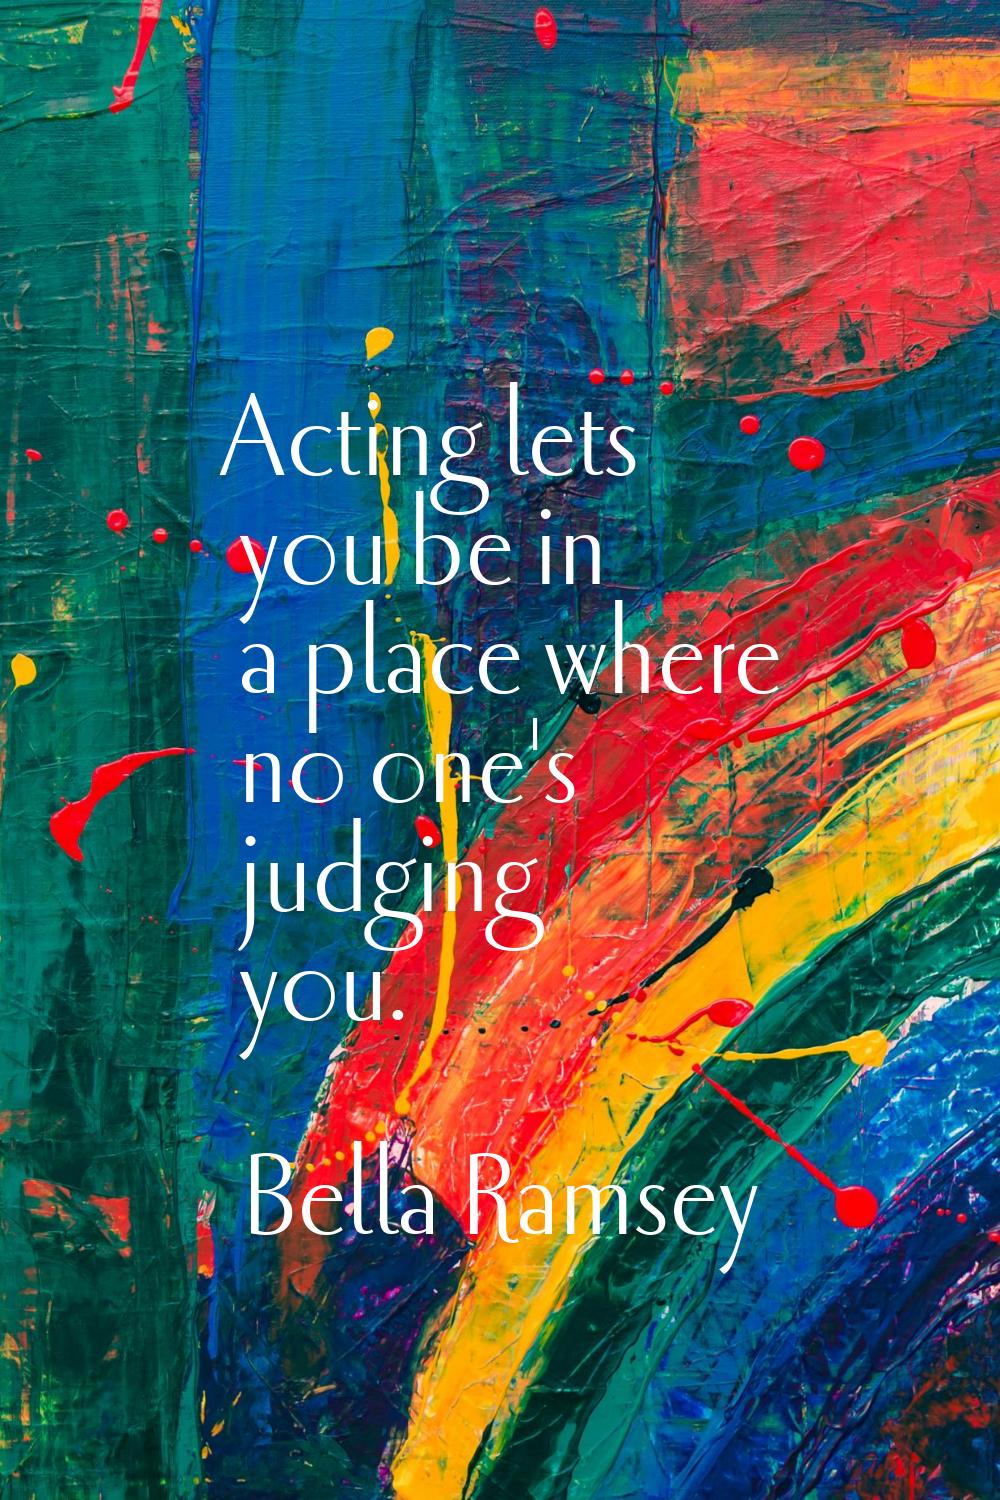 Acting lets you be in a place where no one's judging you.